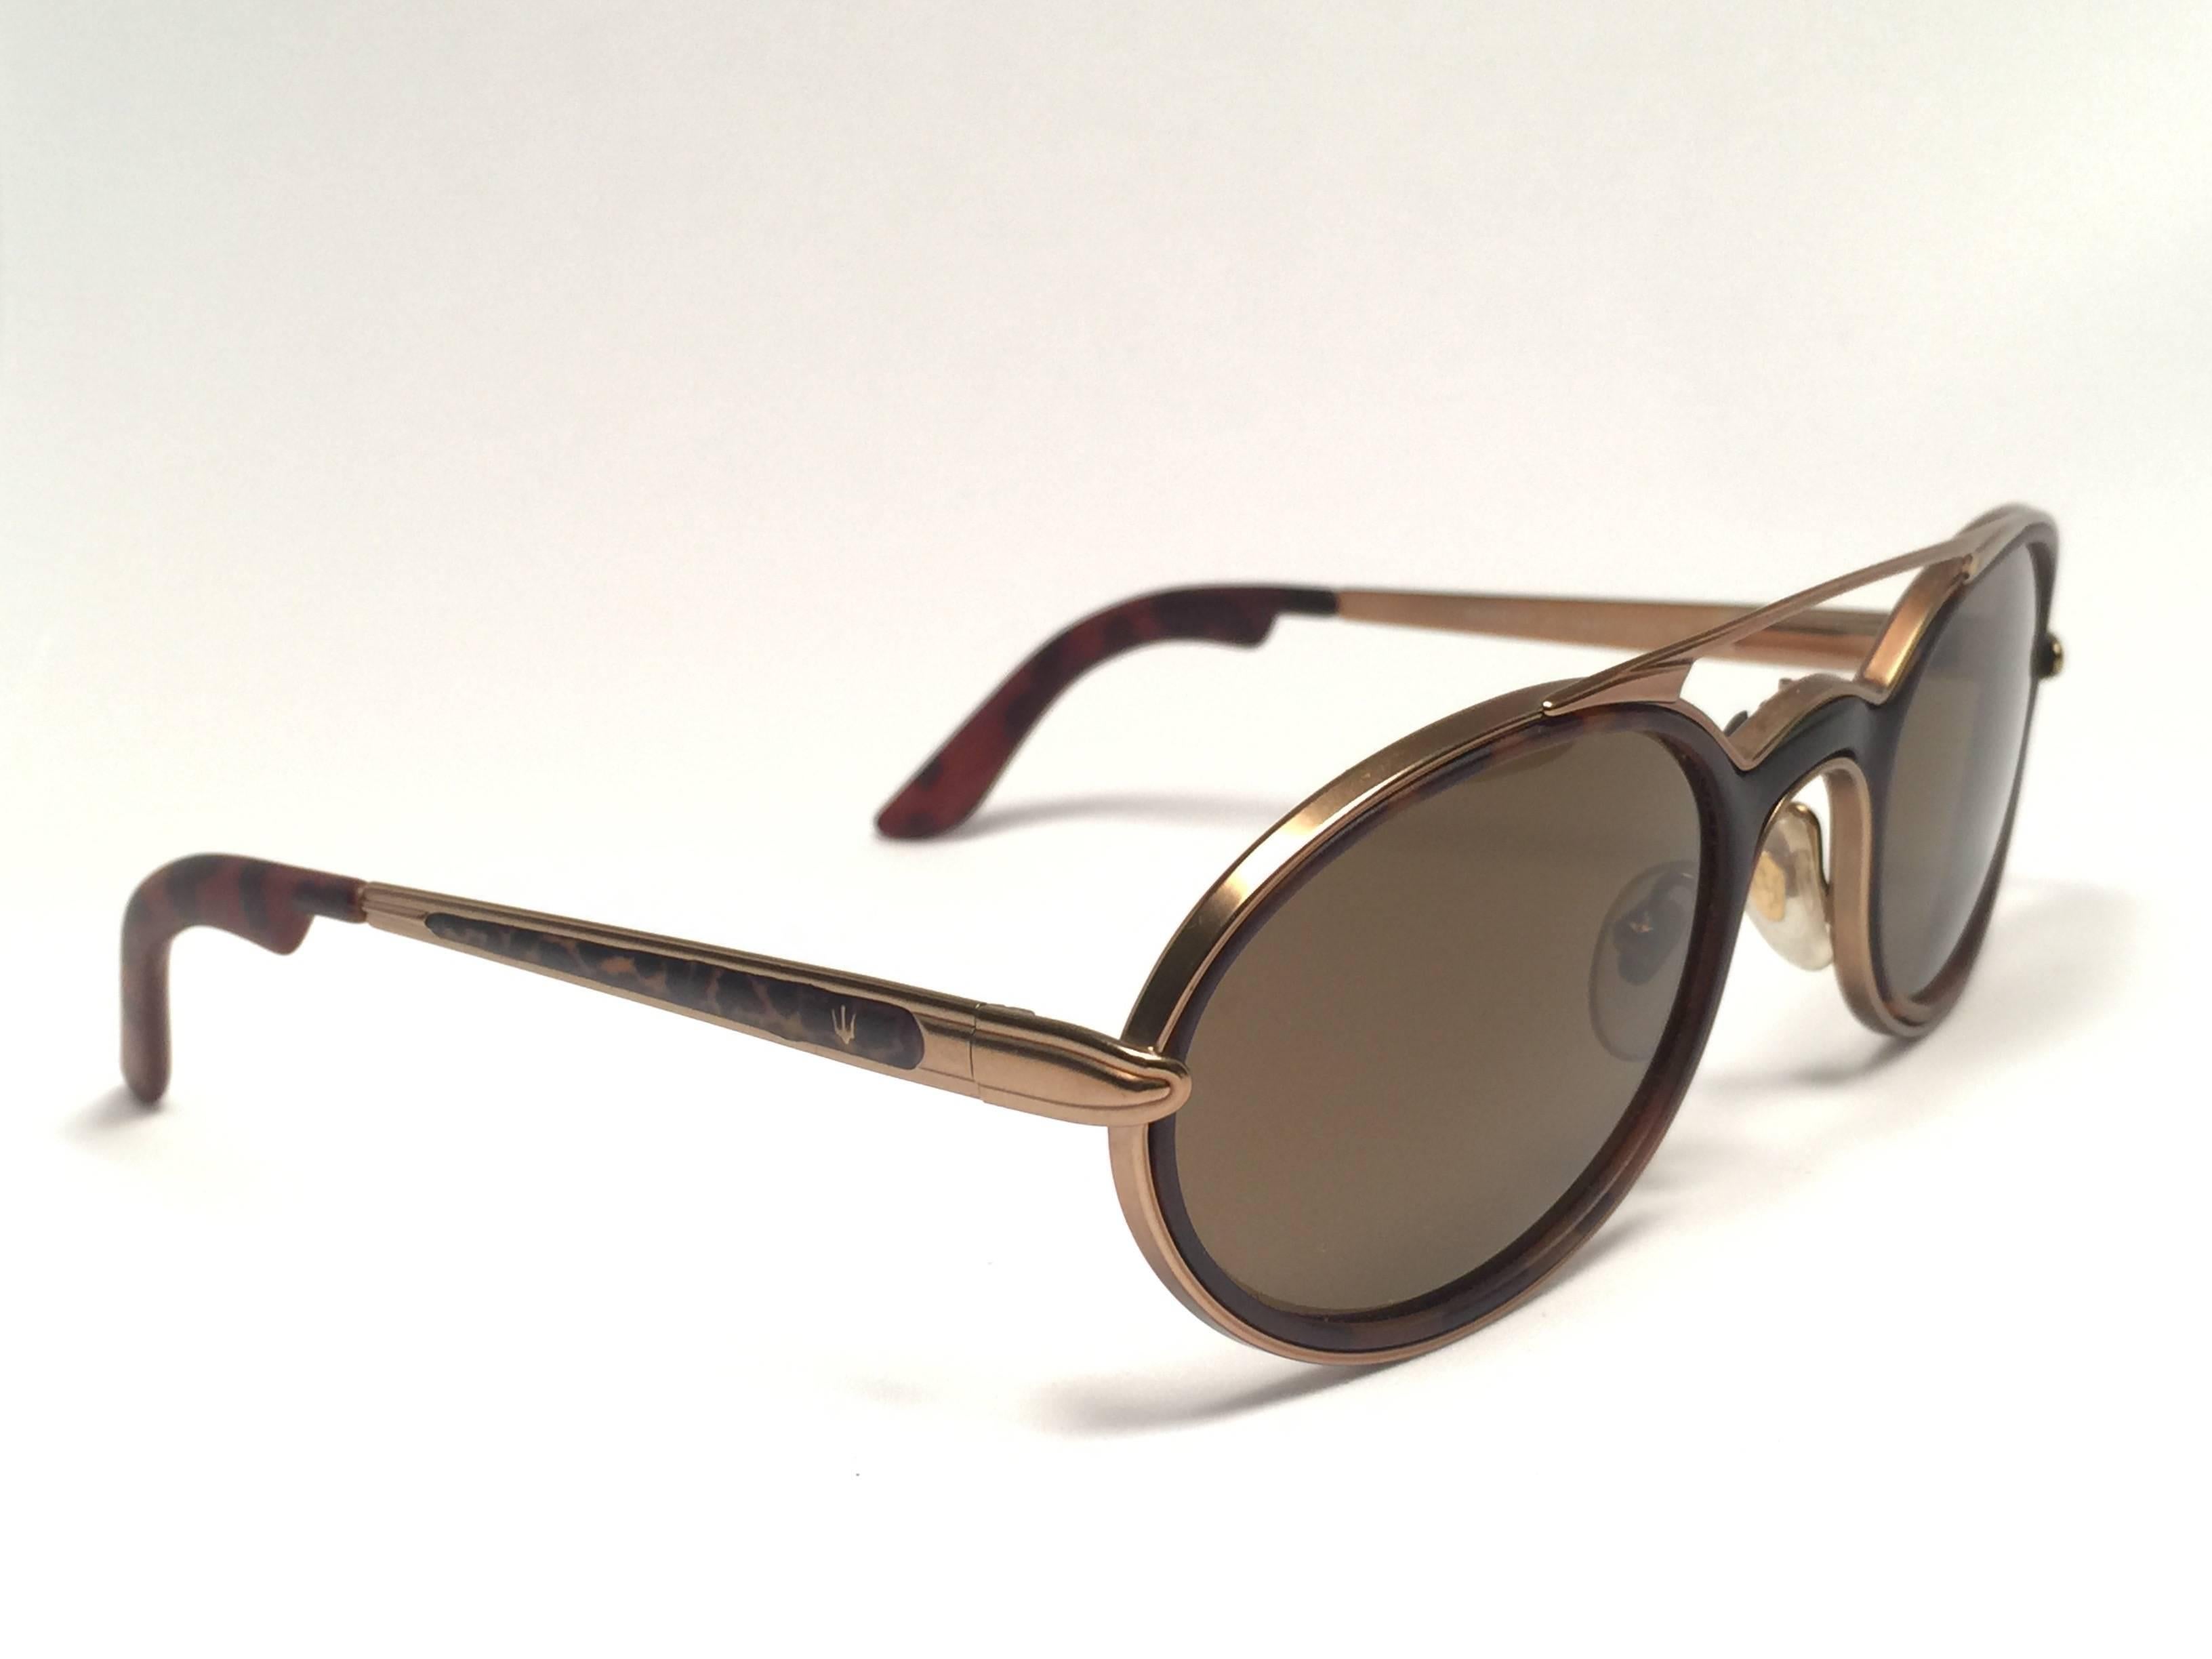 New Vintage Maserati matte gold and tortoise combined frame.

Lenses are medium brown.

New, never worn or displayed.
Made in Italy.